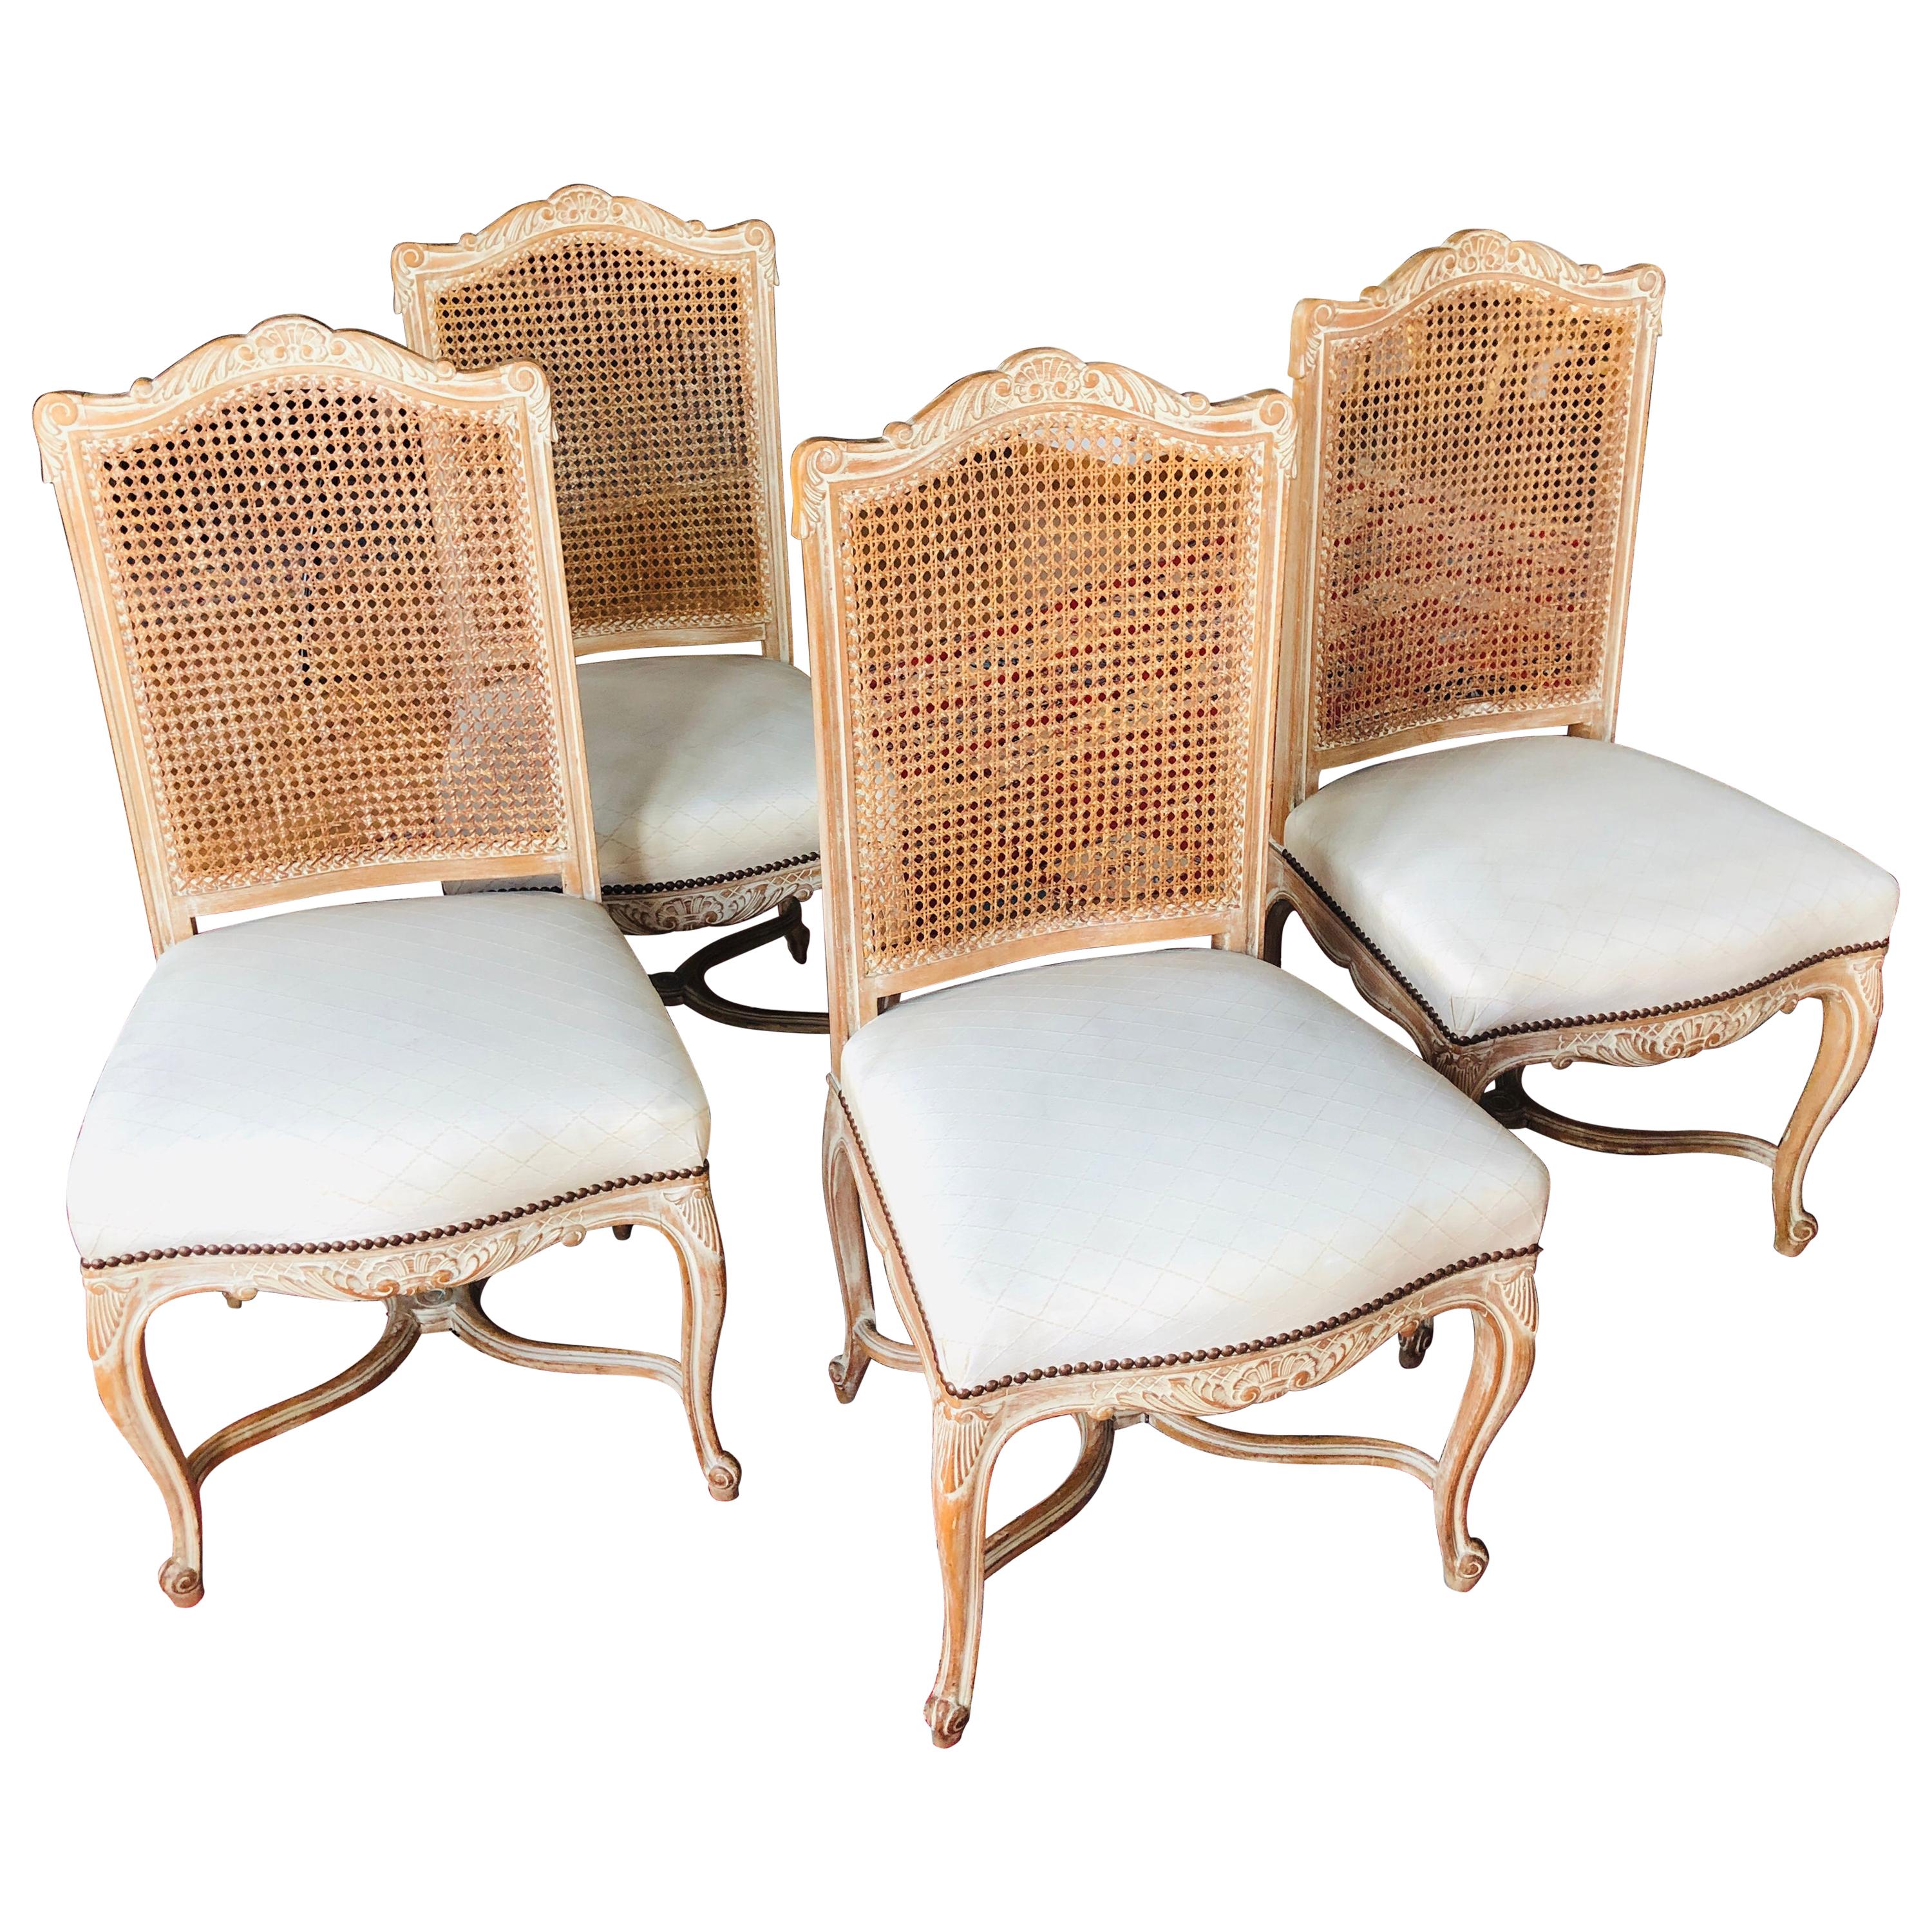 20th Century French Set of Four Hand Carved Dining Chairs with Tall Cane Backs